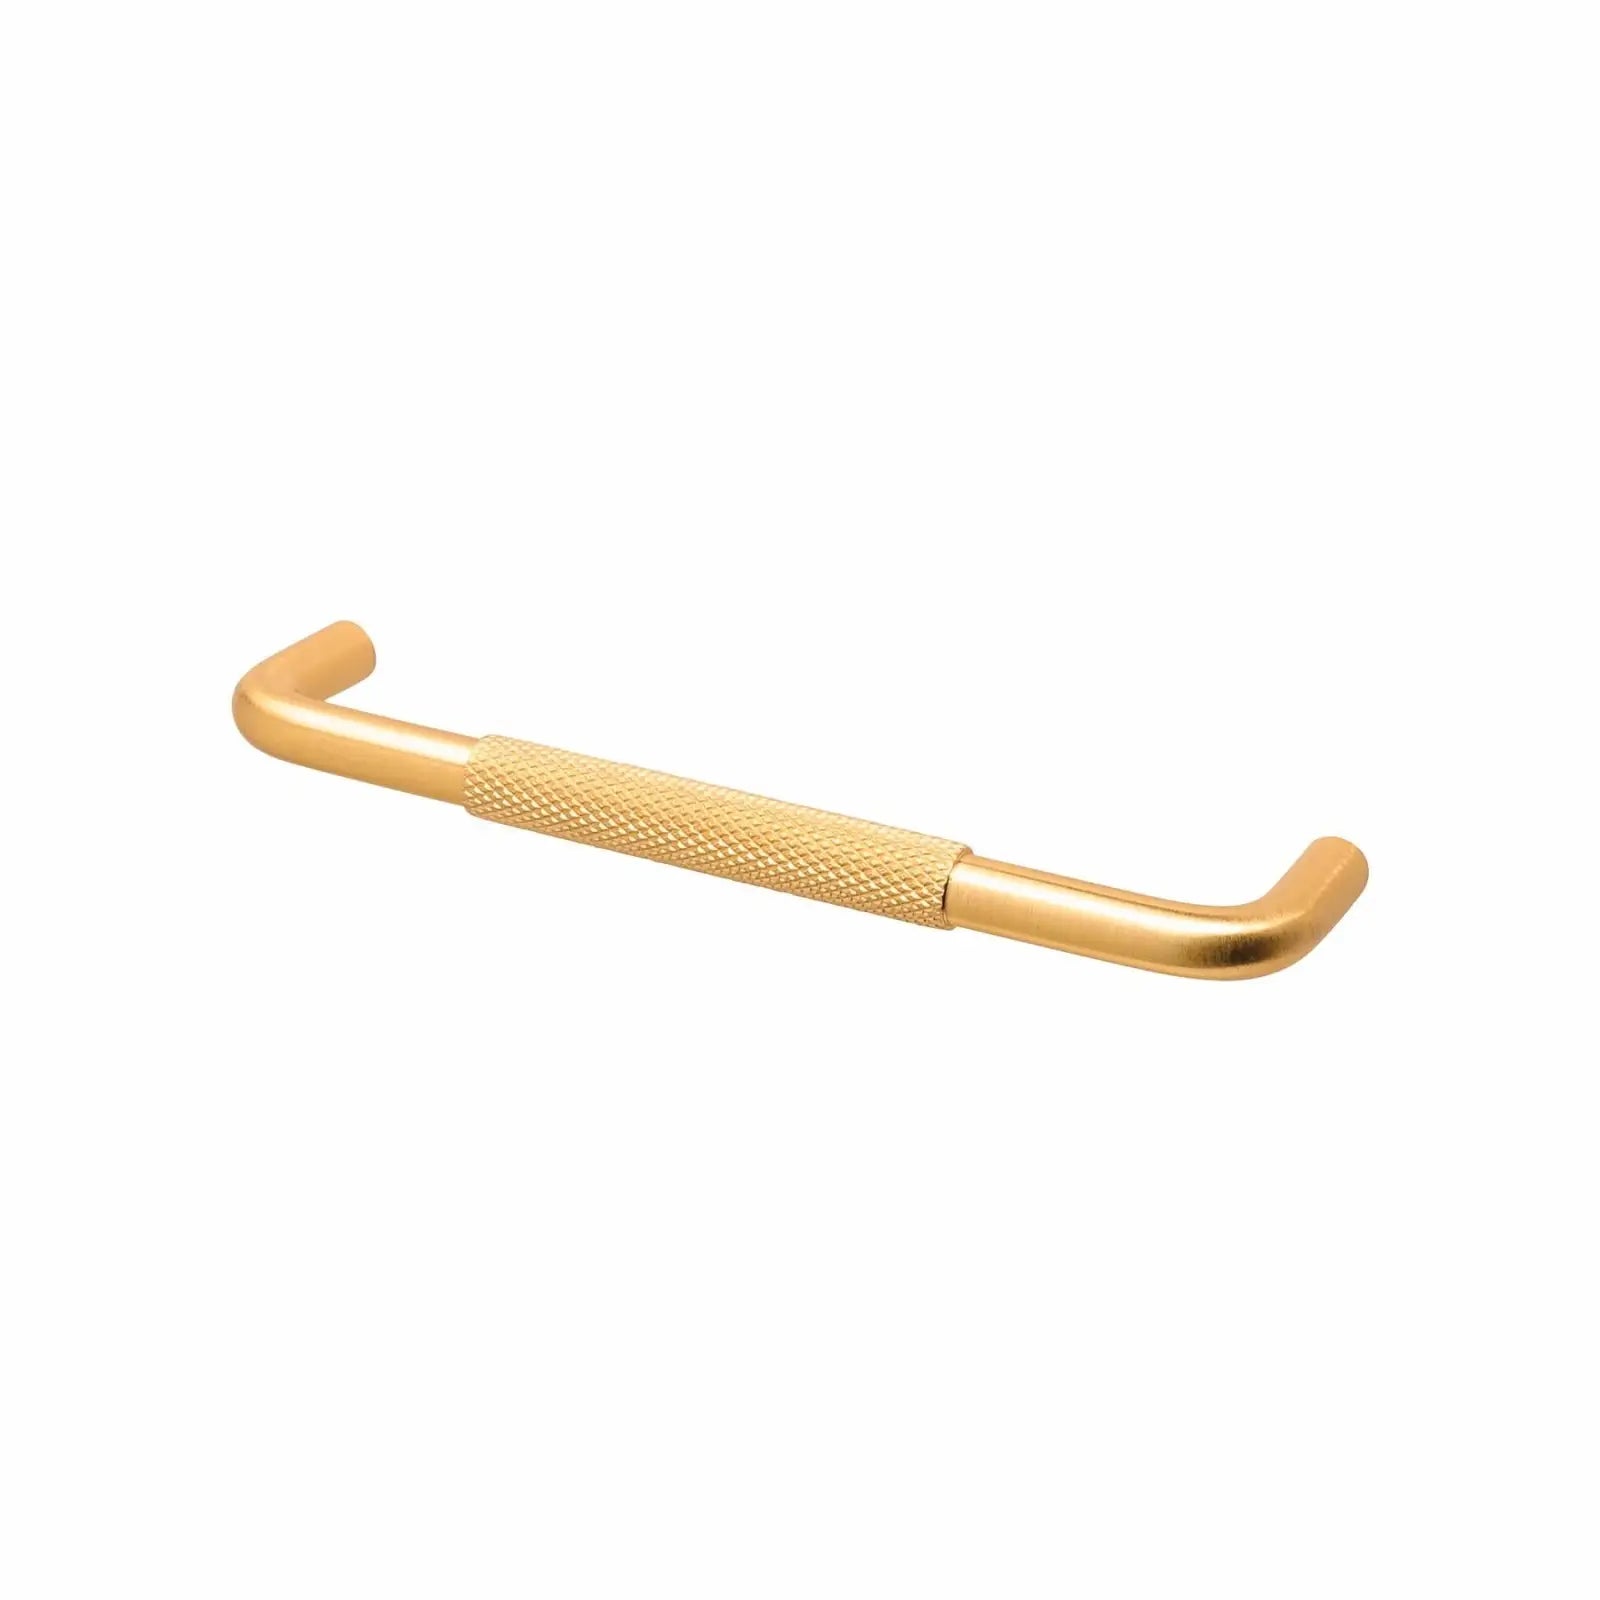 Insignia - Knurled D Shaped Cabinet Drawer Handle - Matt Gold - Decor And Decor